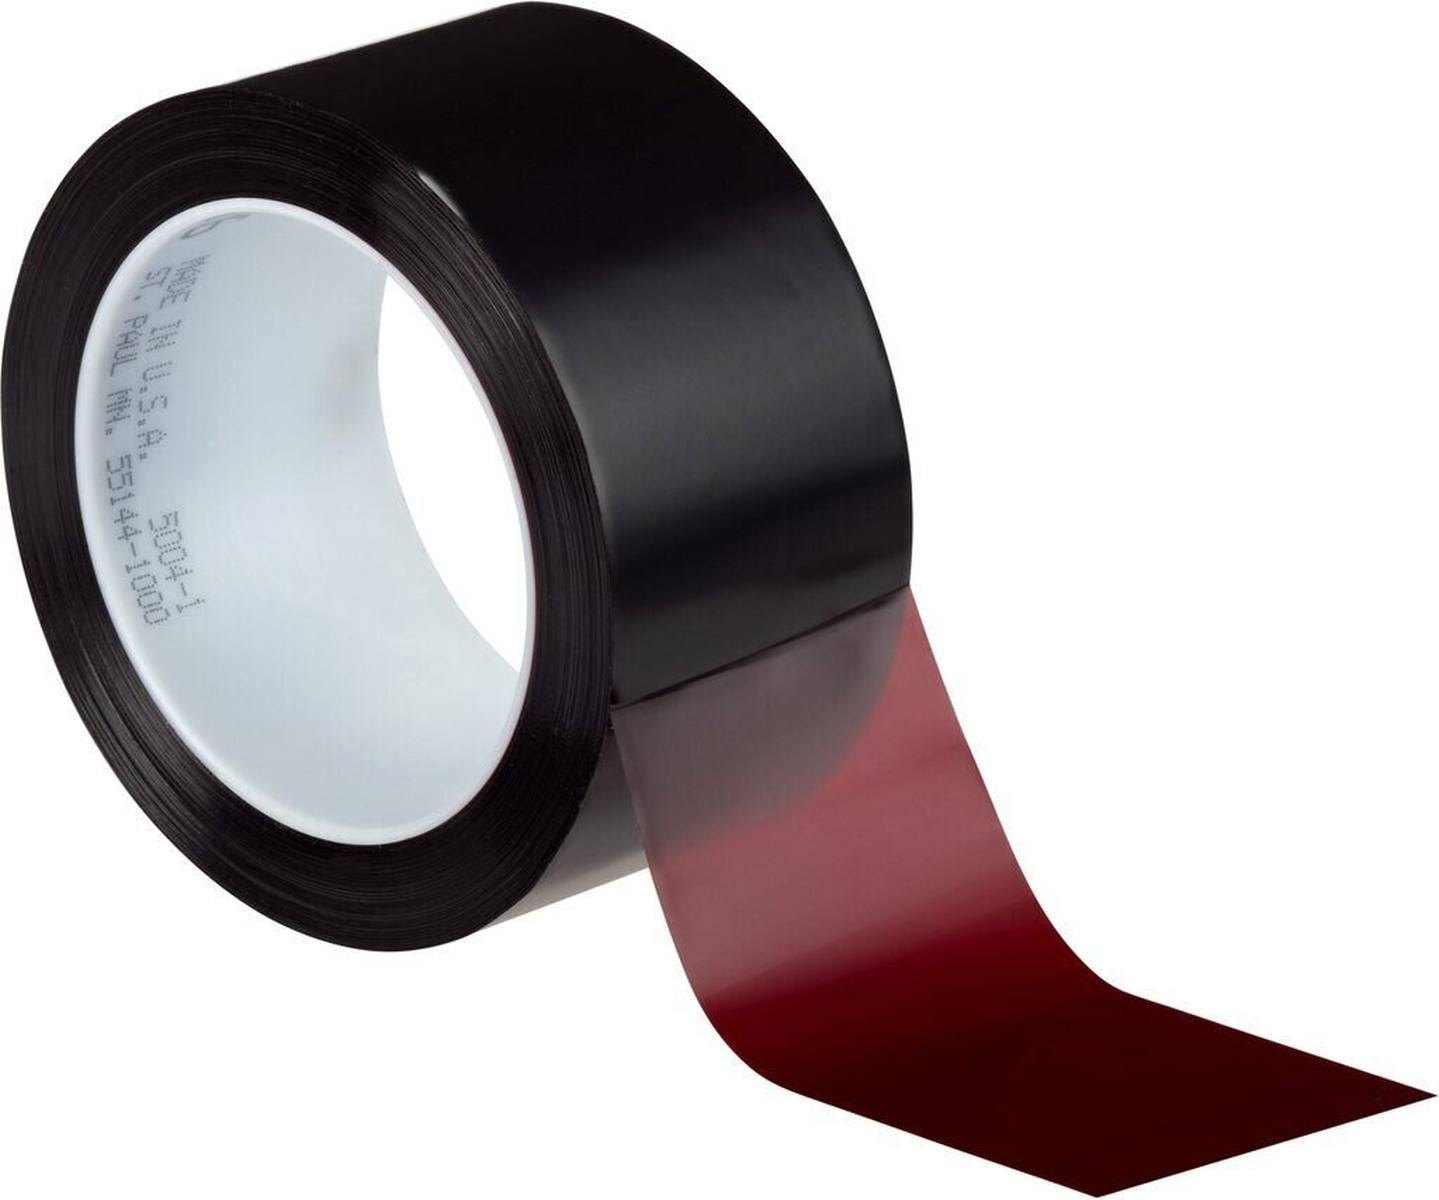 3M Lithographic adhesive tape 616 25 mm x 66 m